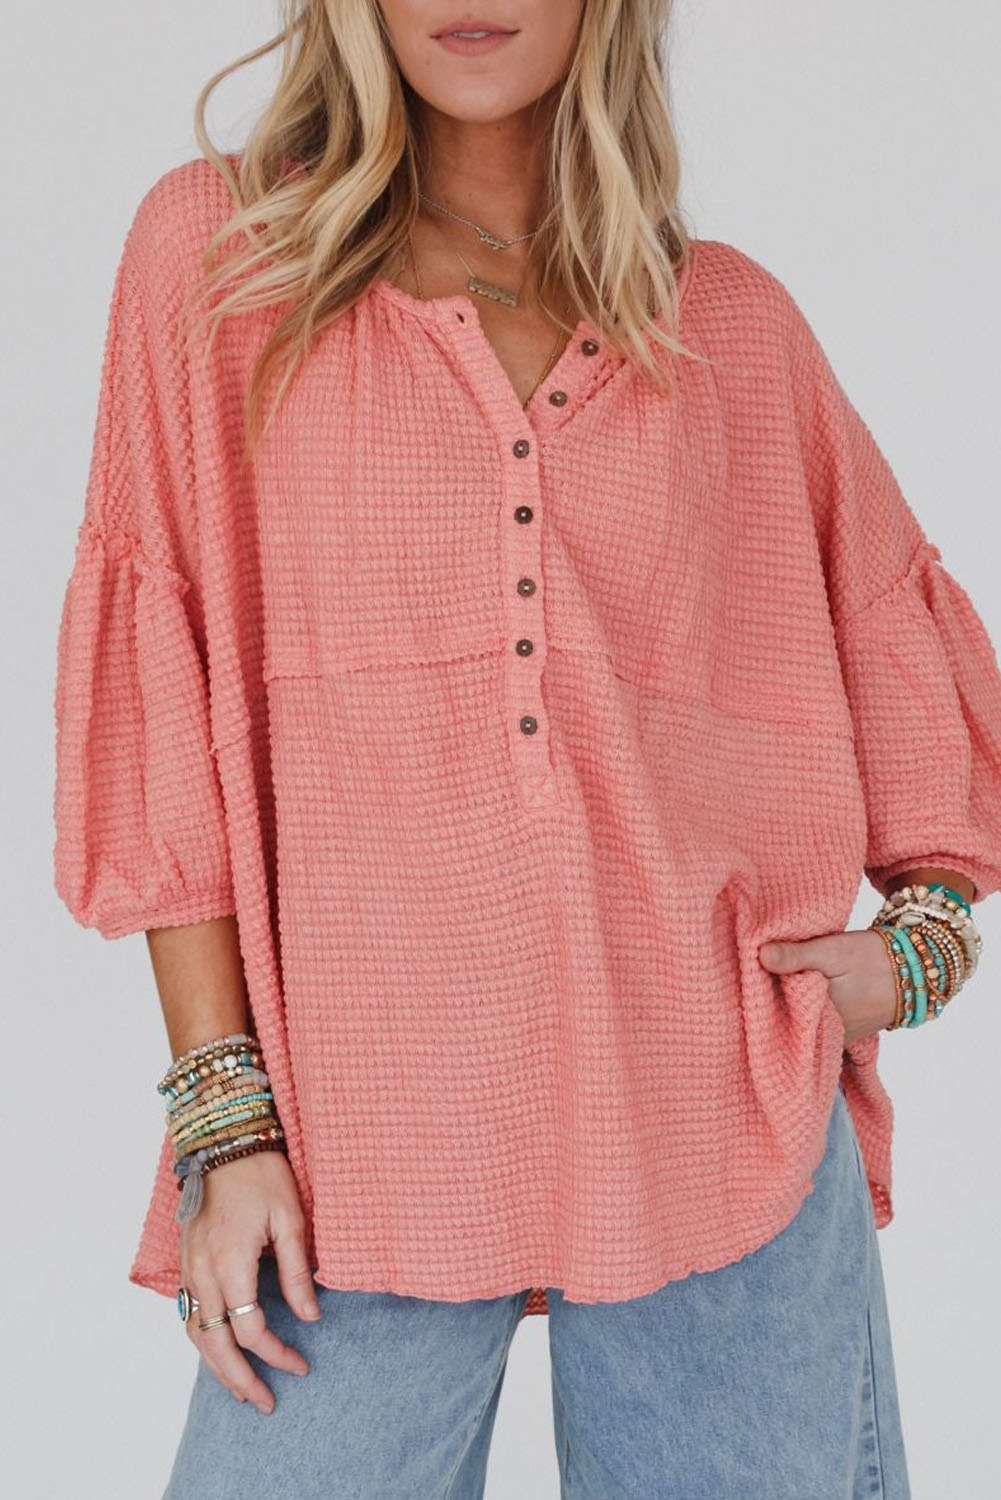 Shewin Wholesale Apparel Boutique Pink Waffled BRACELET Sleeve Oversized Henley Top